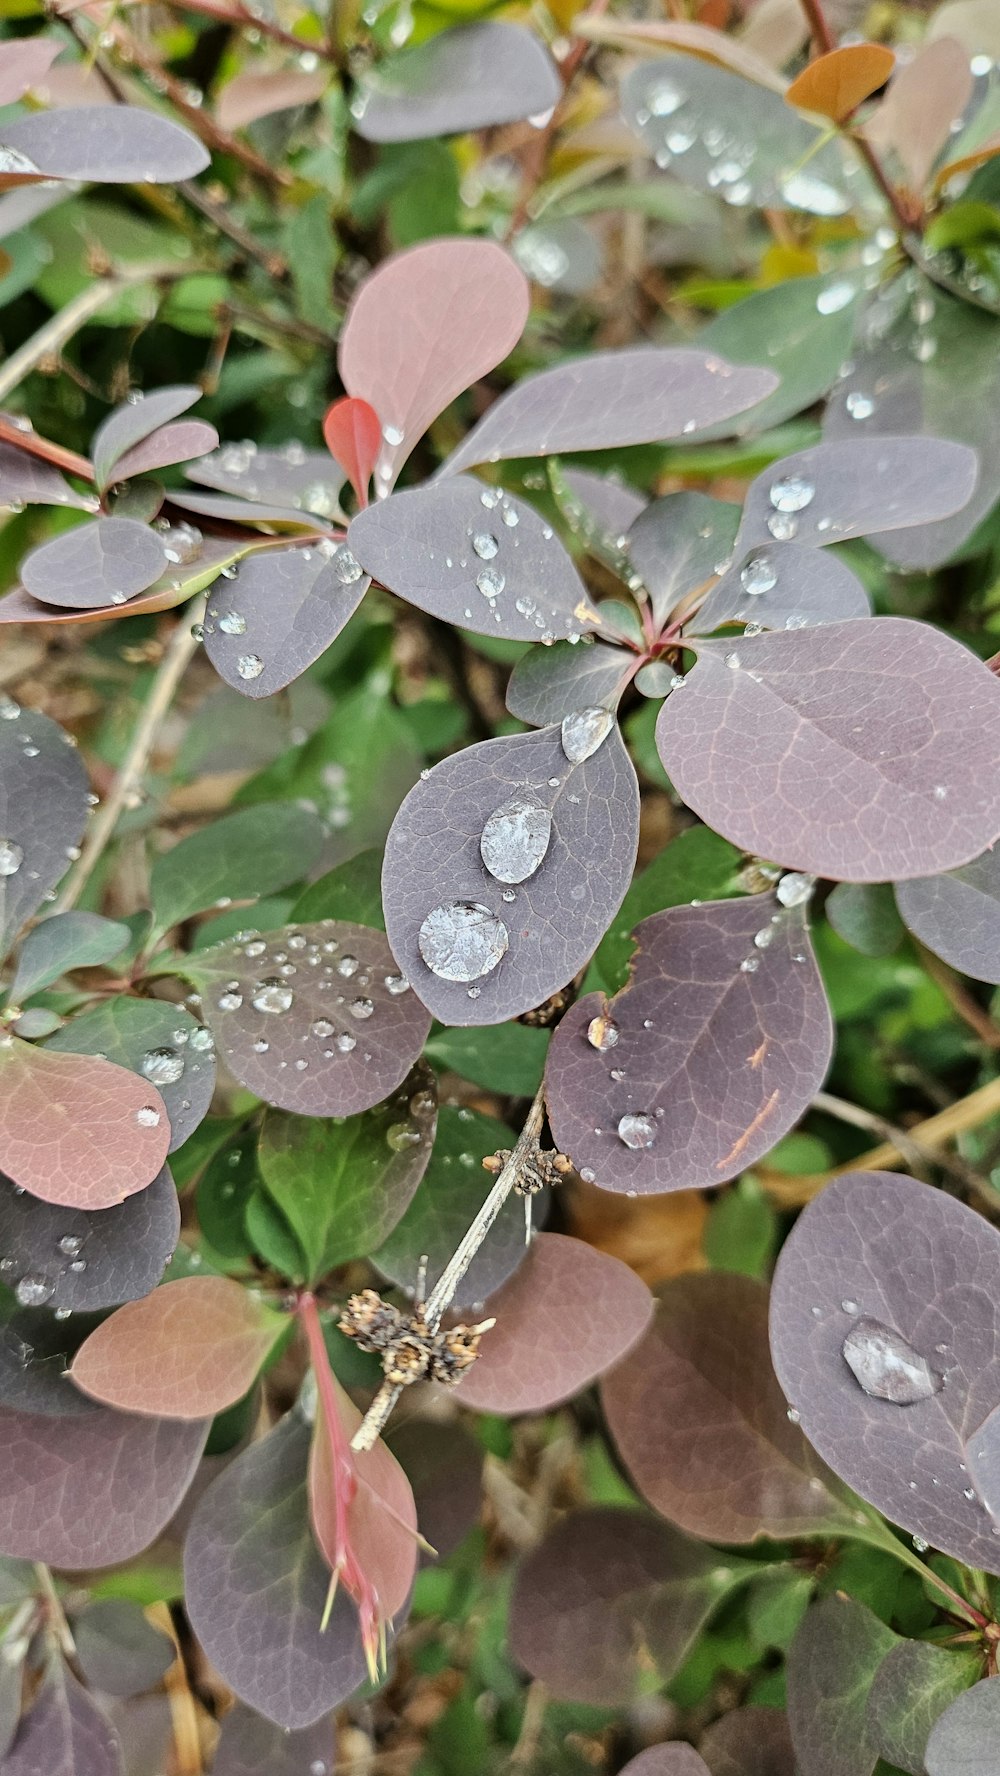 a close up of leaves with water droplets on them